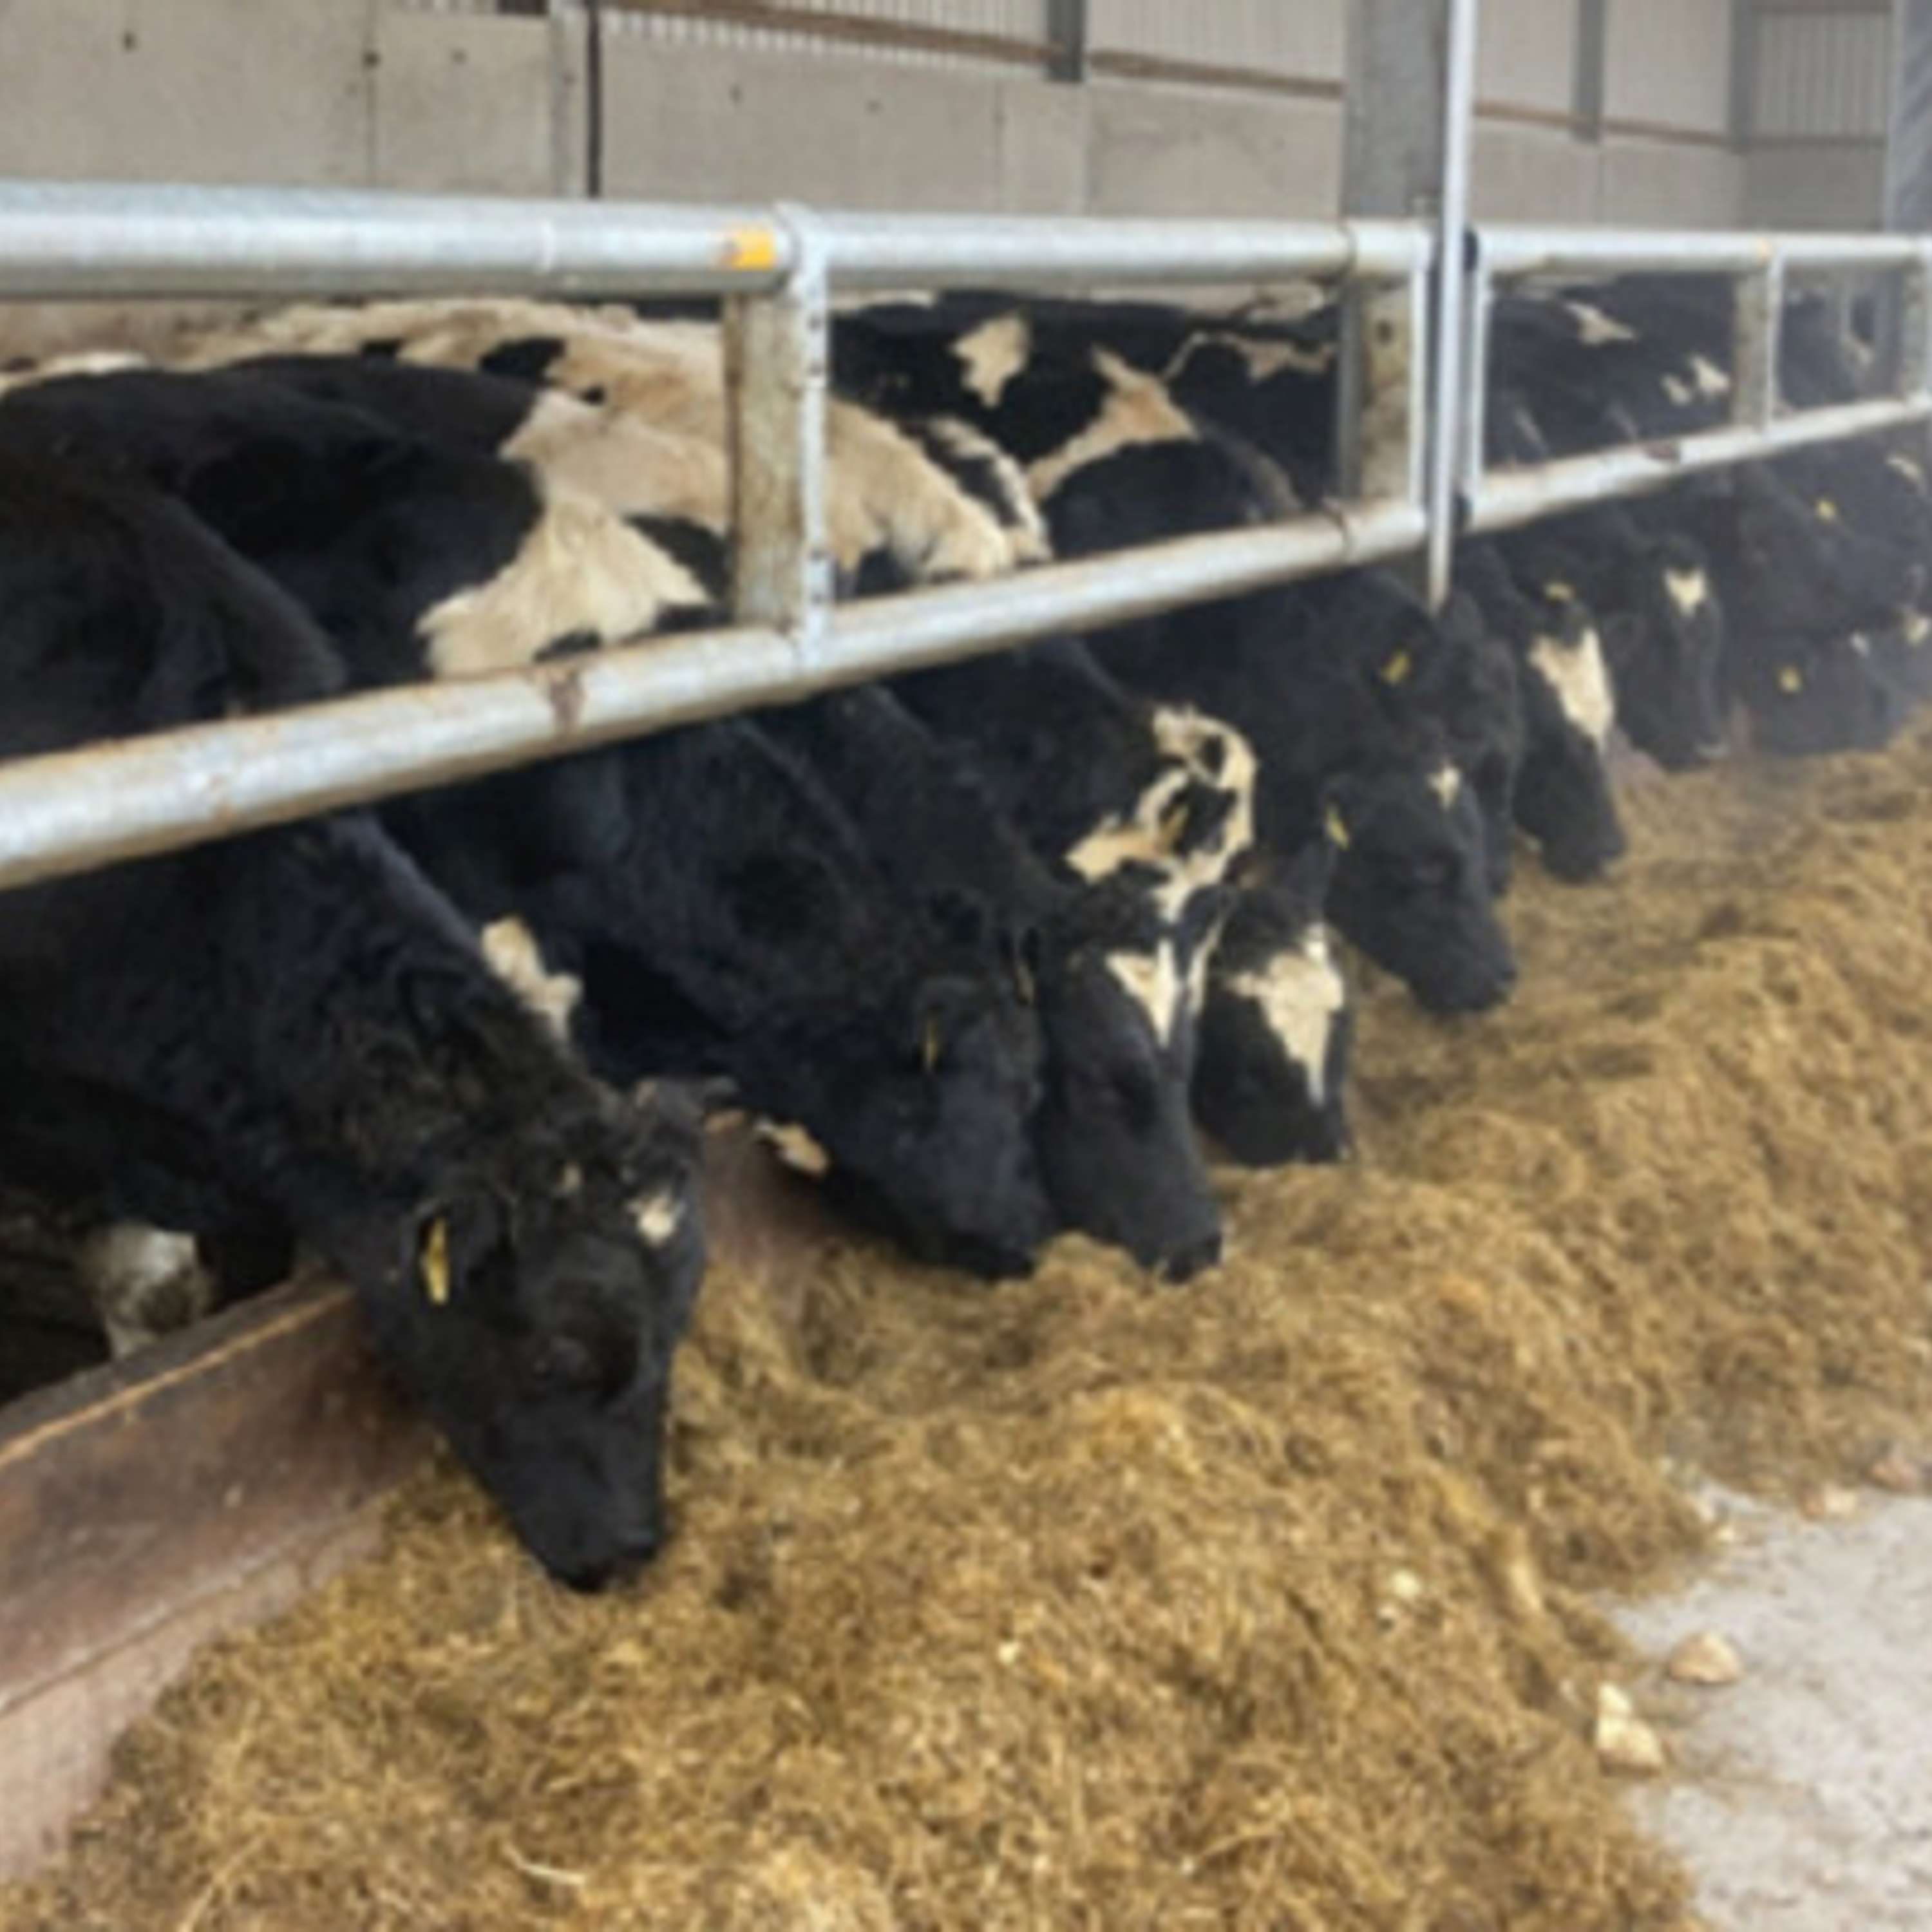 DairyBeef 500 farmer, Gareth Peoples, on winter management of his dairy beef system